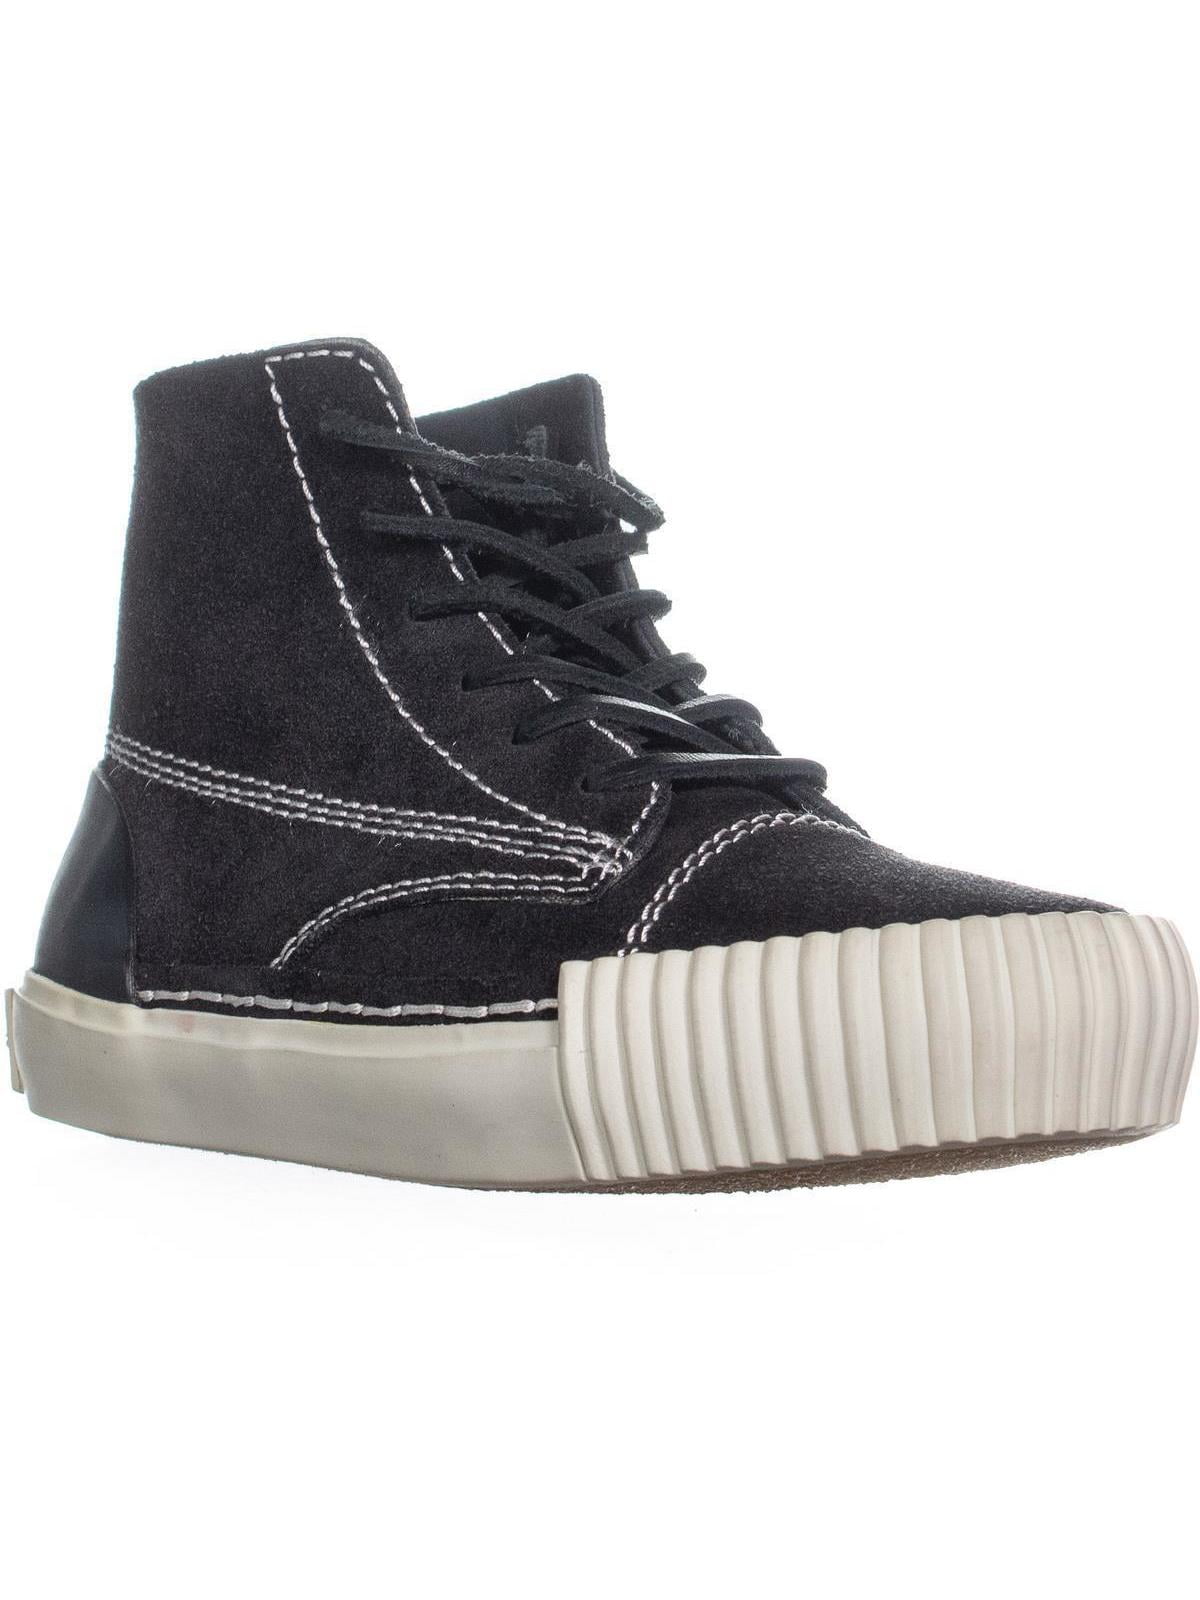 analysere beskyttelse Siege Womens Alexander Wang Perry Lace Up High Top Sneakers, Black - Walmart.com